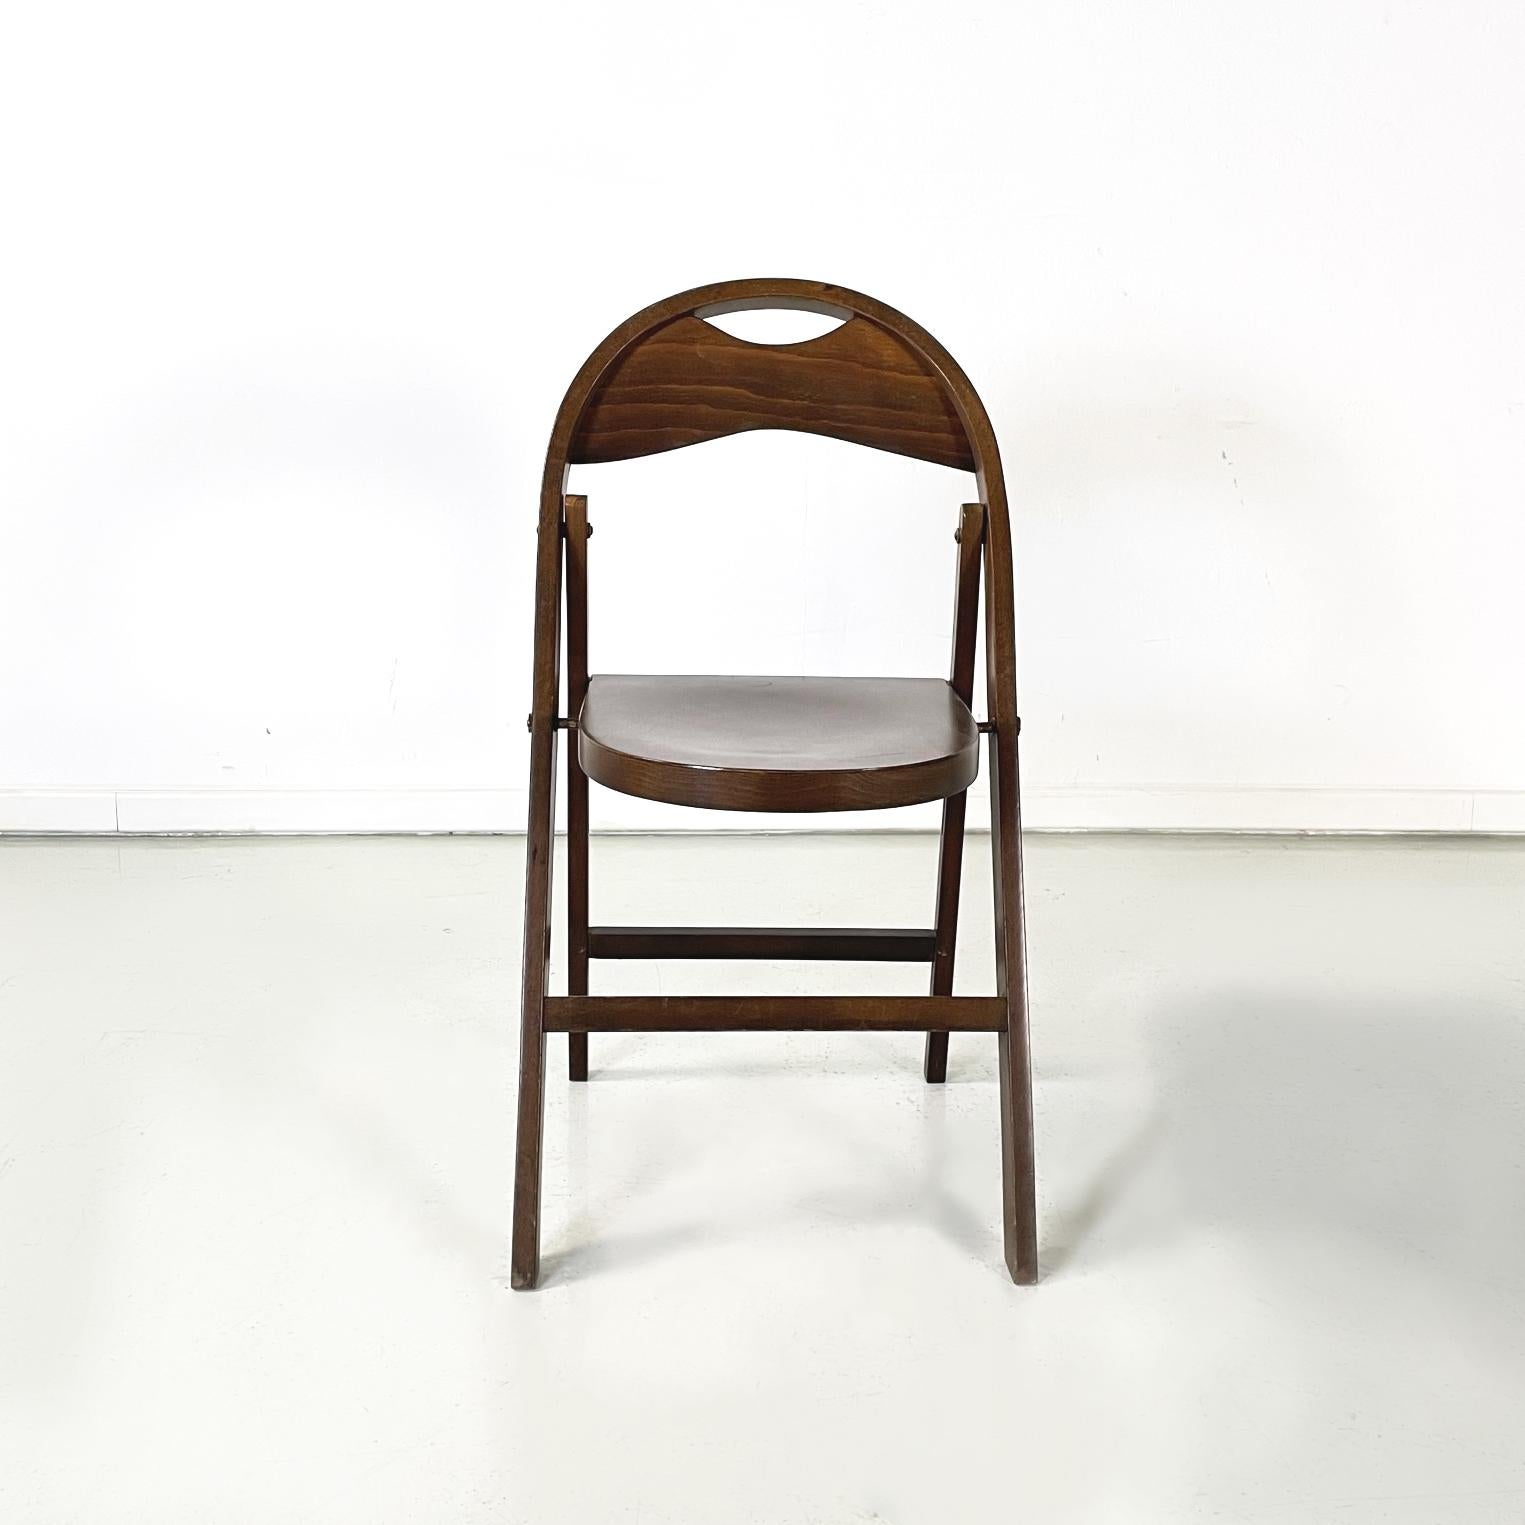 Mid-Century Modern Italian Midcentury Wooden Folding Chairs Tric by Castiglioni, 1960s